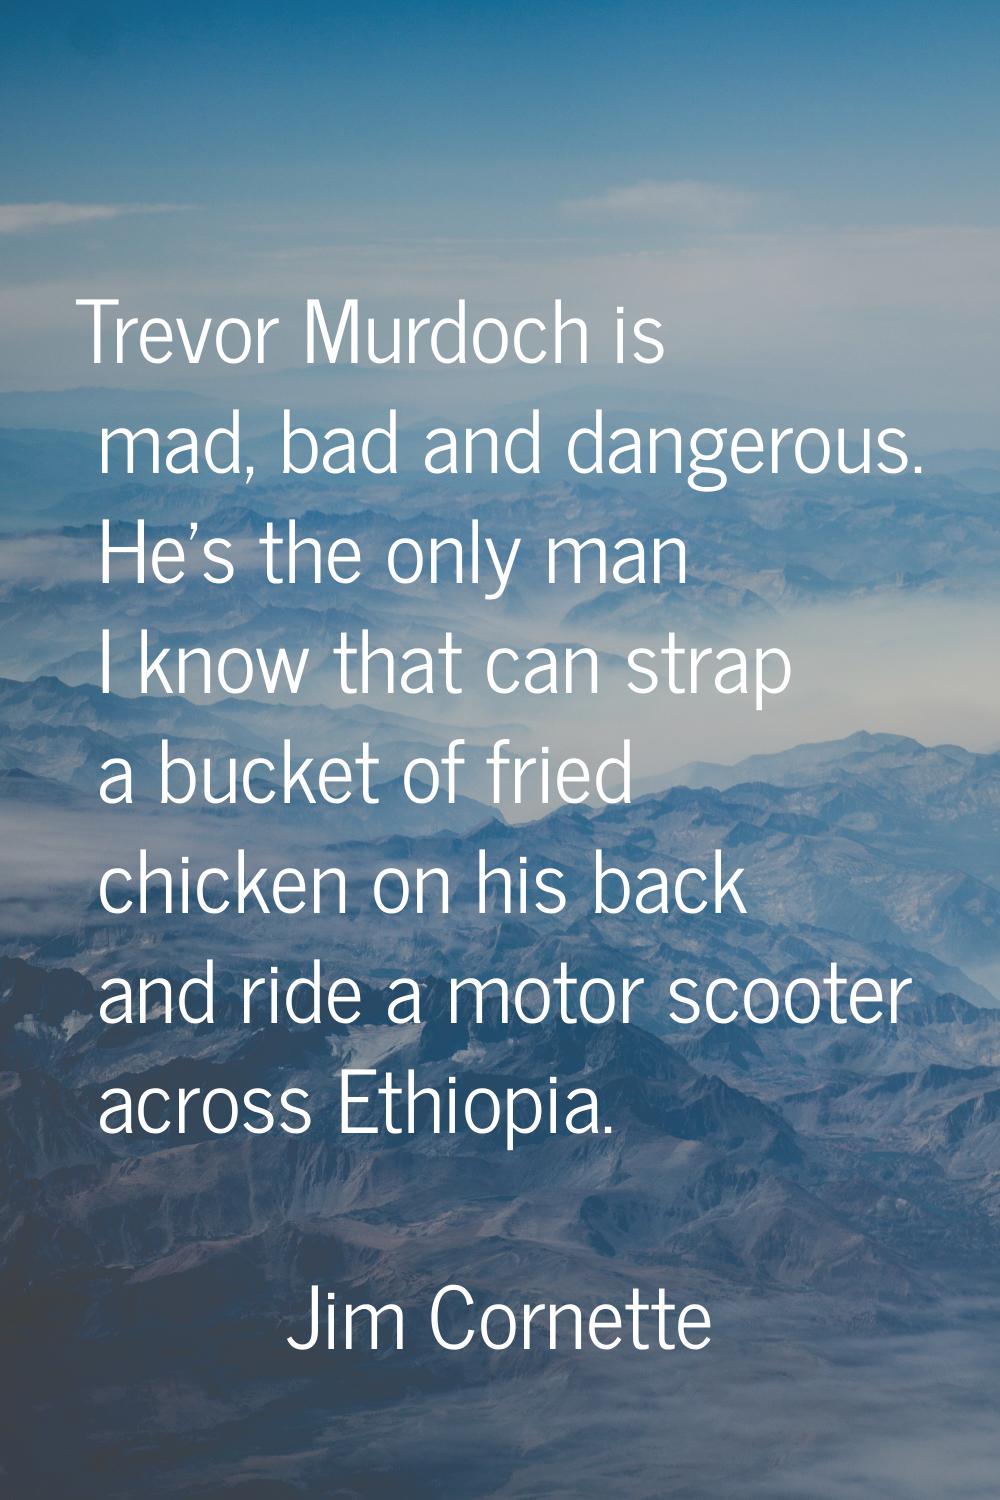 Trevor Murdoch is mad, bad and dangerous. He's the only man I know that can strap a bucket of fried